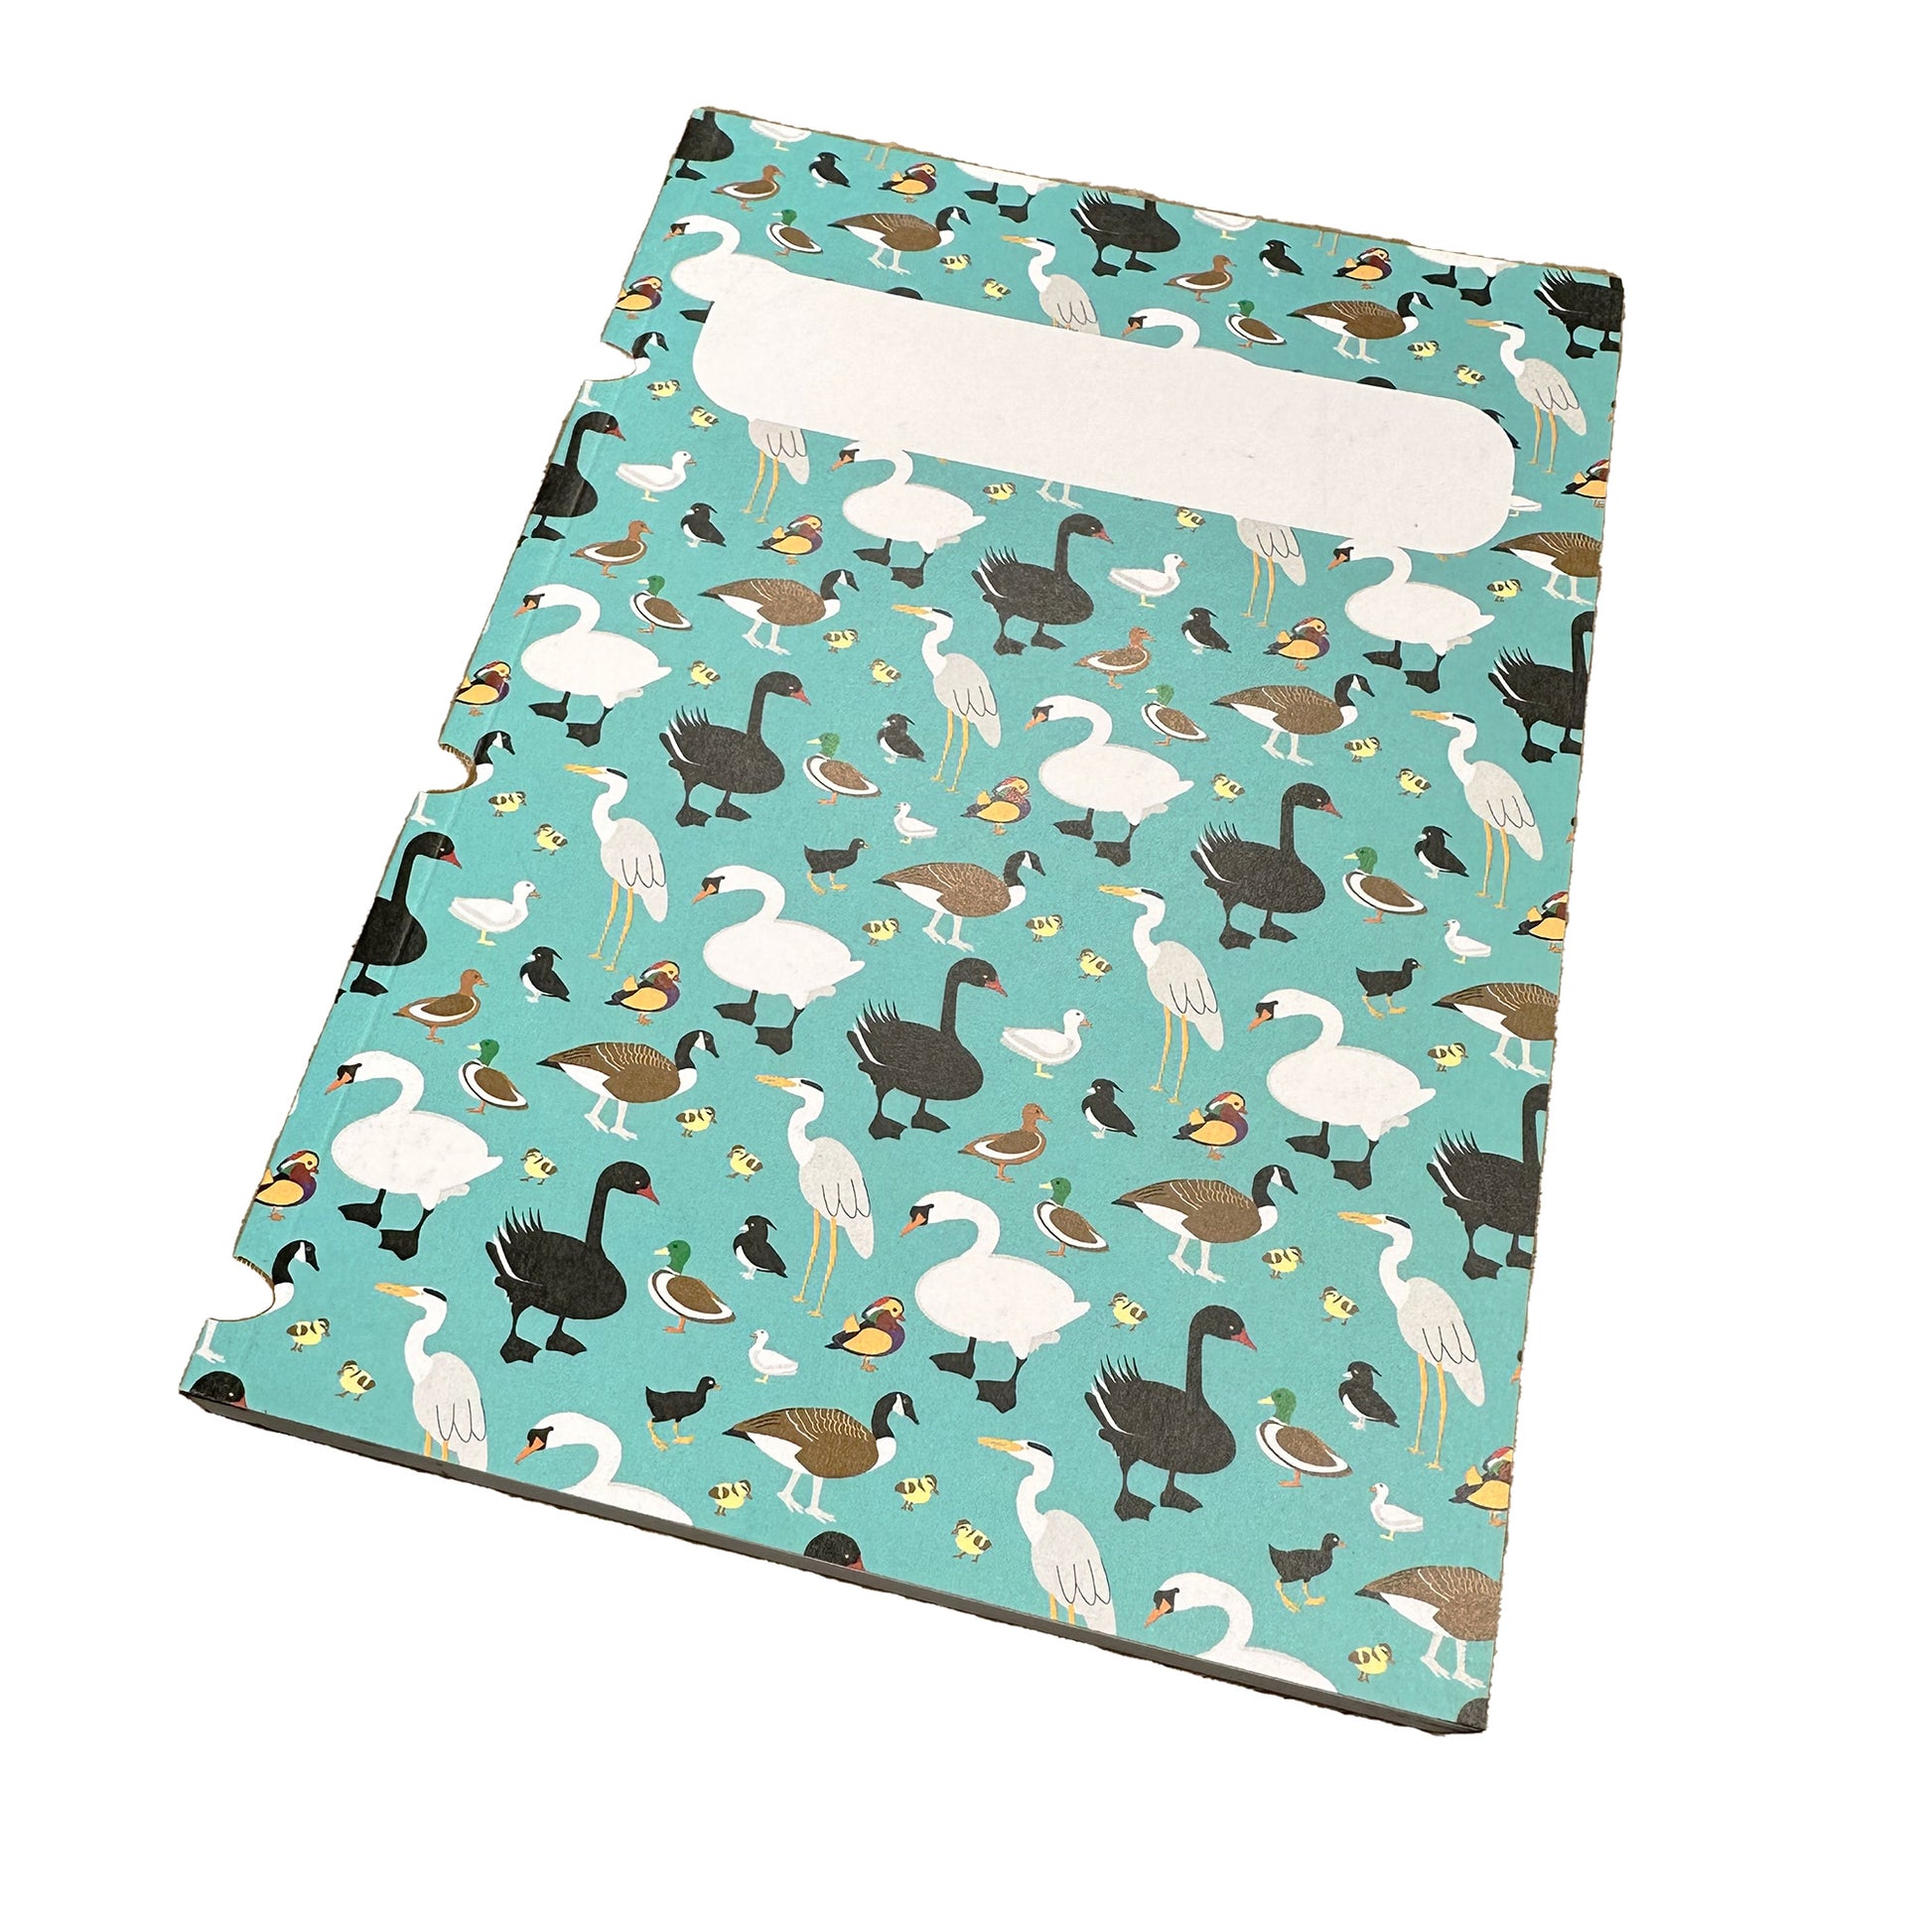 Ducks notebook, 160 page plain and ruled journal with duck design cover from ummPixies